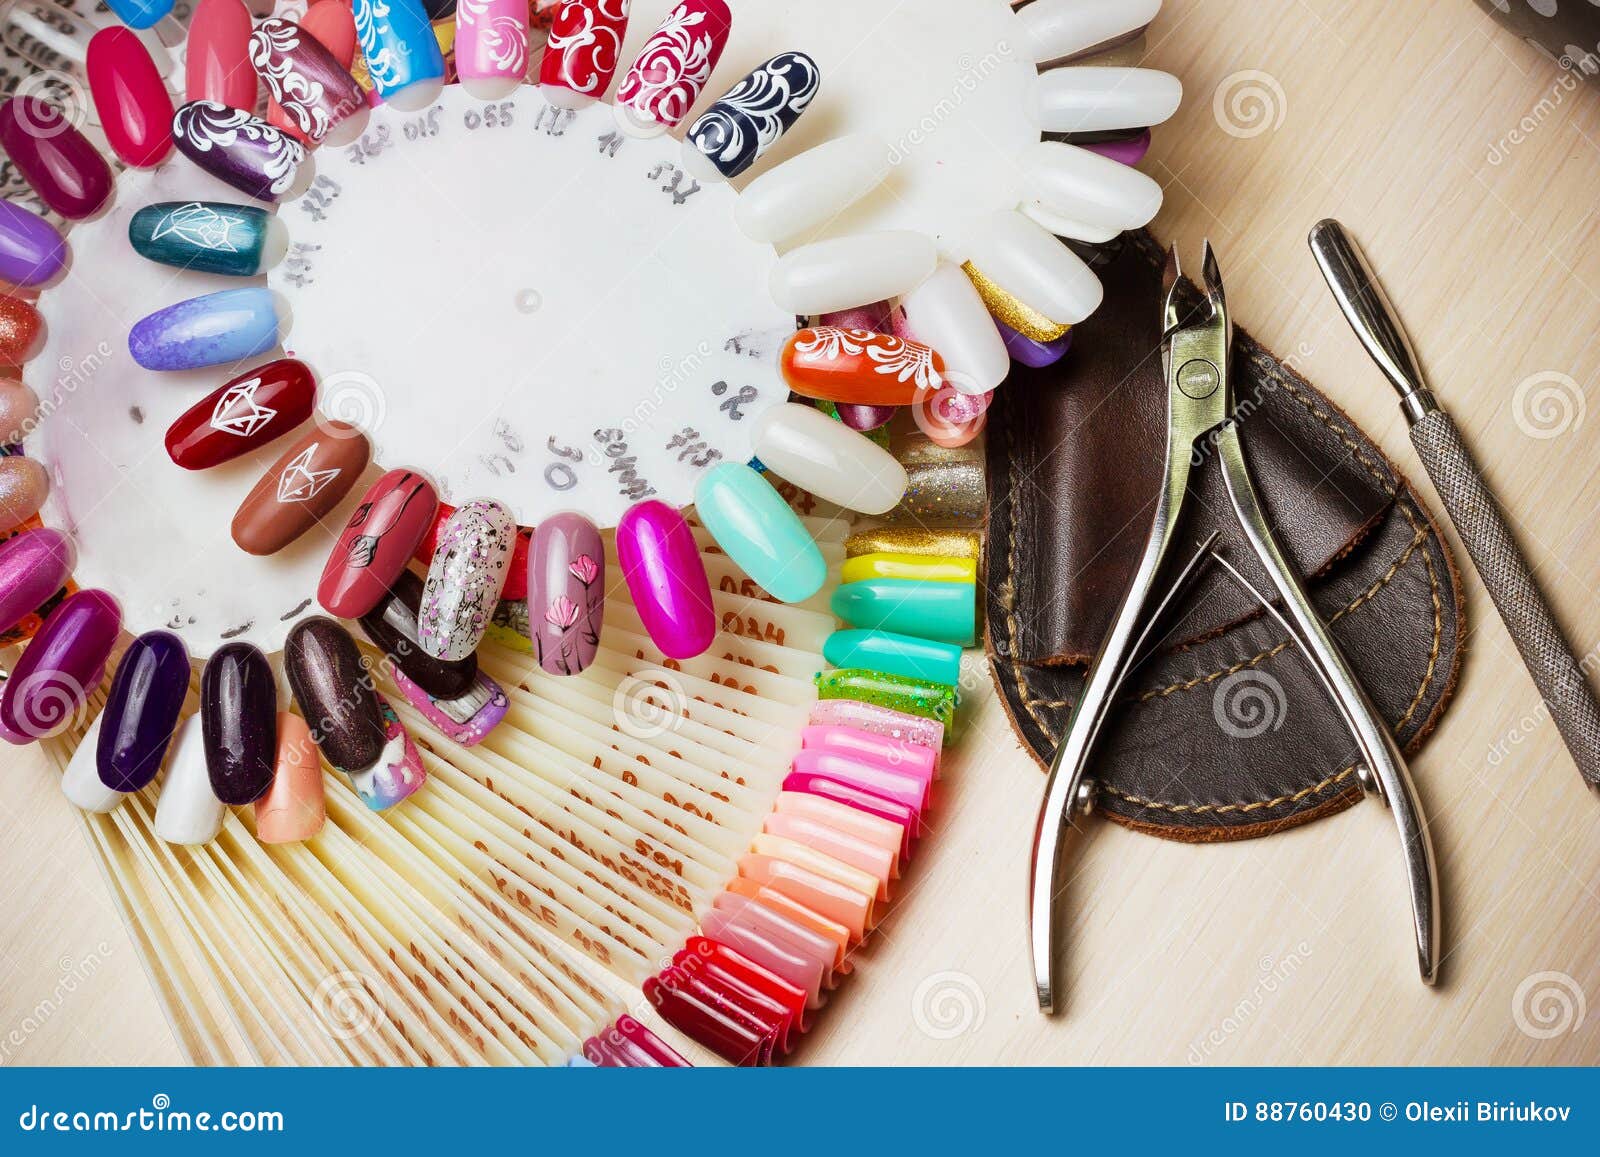 7. The Top Nail Art Accessories You Need in Your Collection - wide 10